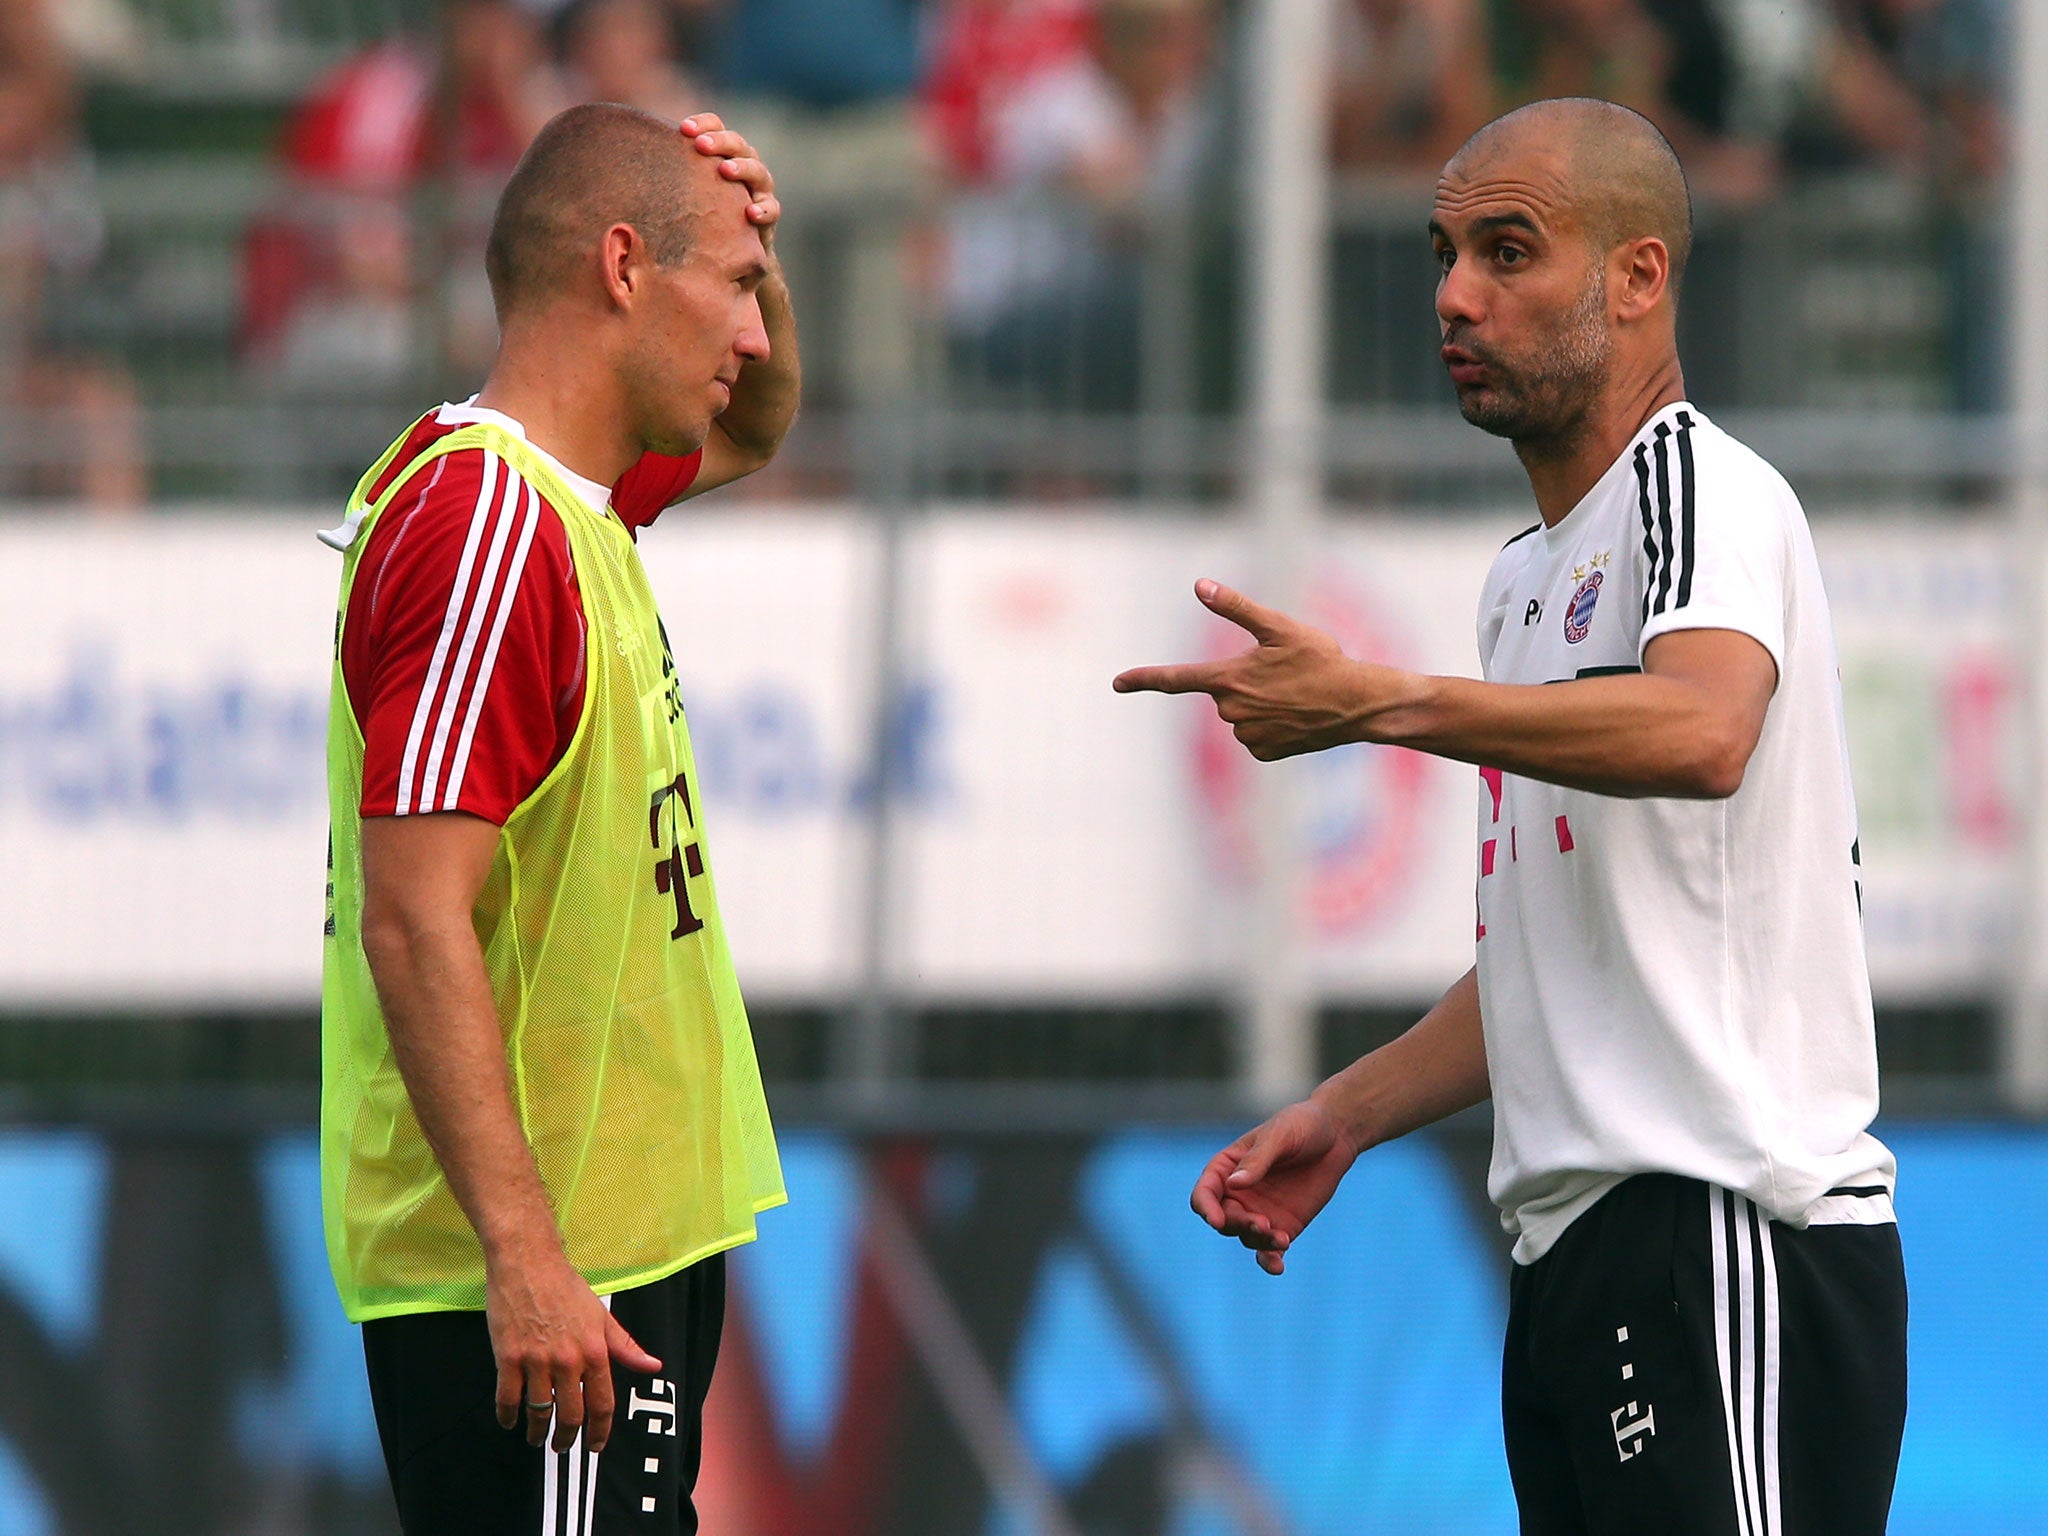 Robben had high praise for former manager Pep Guardiola